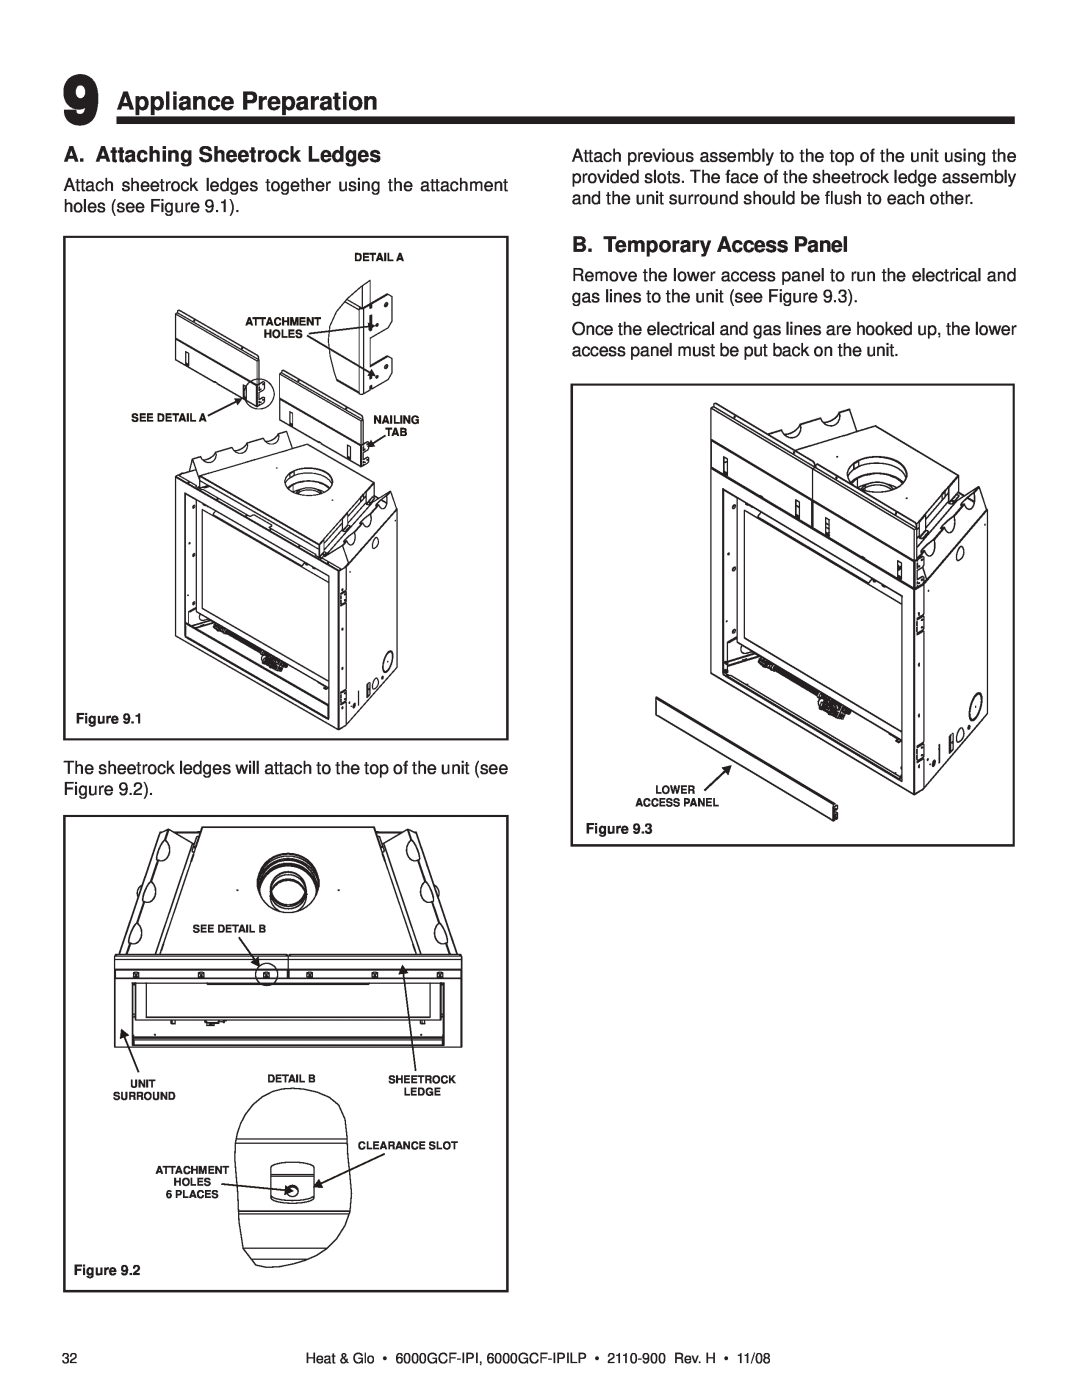 Hearth and Home Technologies 6000GCF-IPIL Appliance Preparation, A. Attaching Sheetrock Ledges, B. Temporary Access Panel 